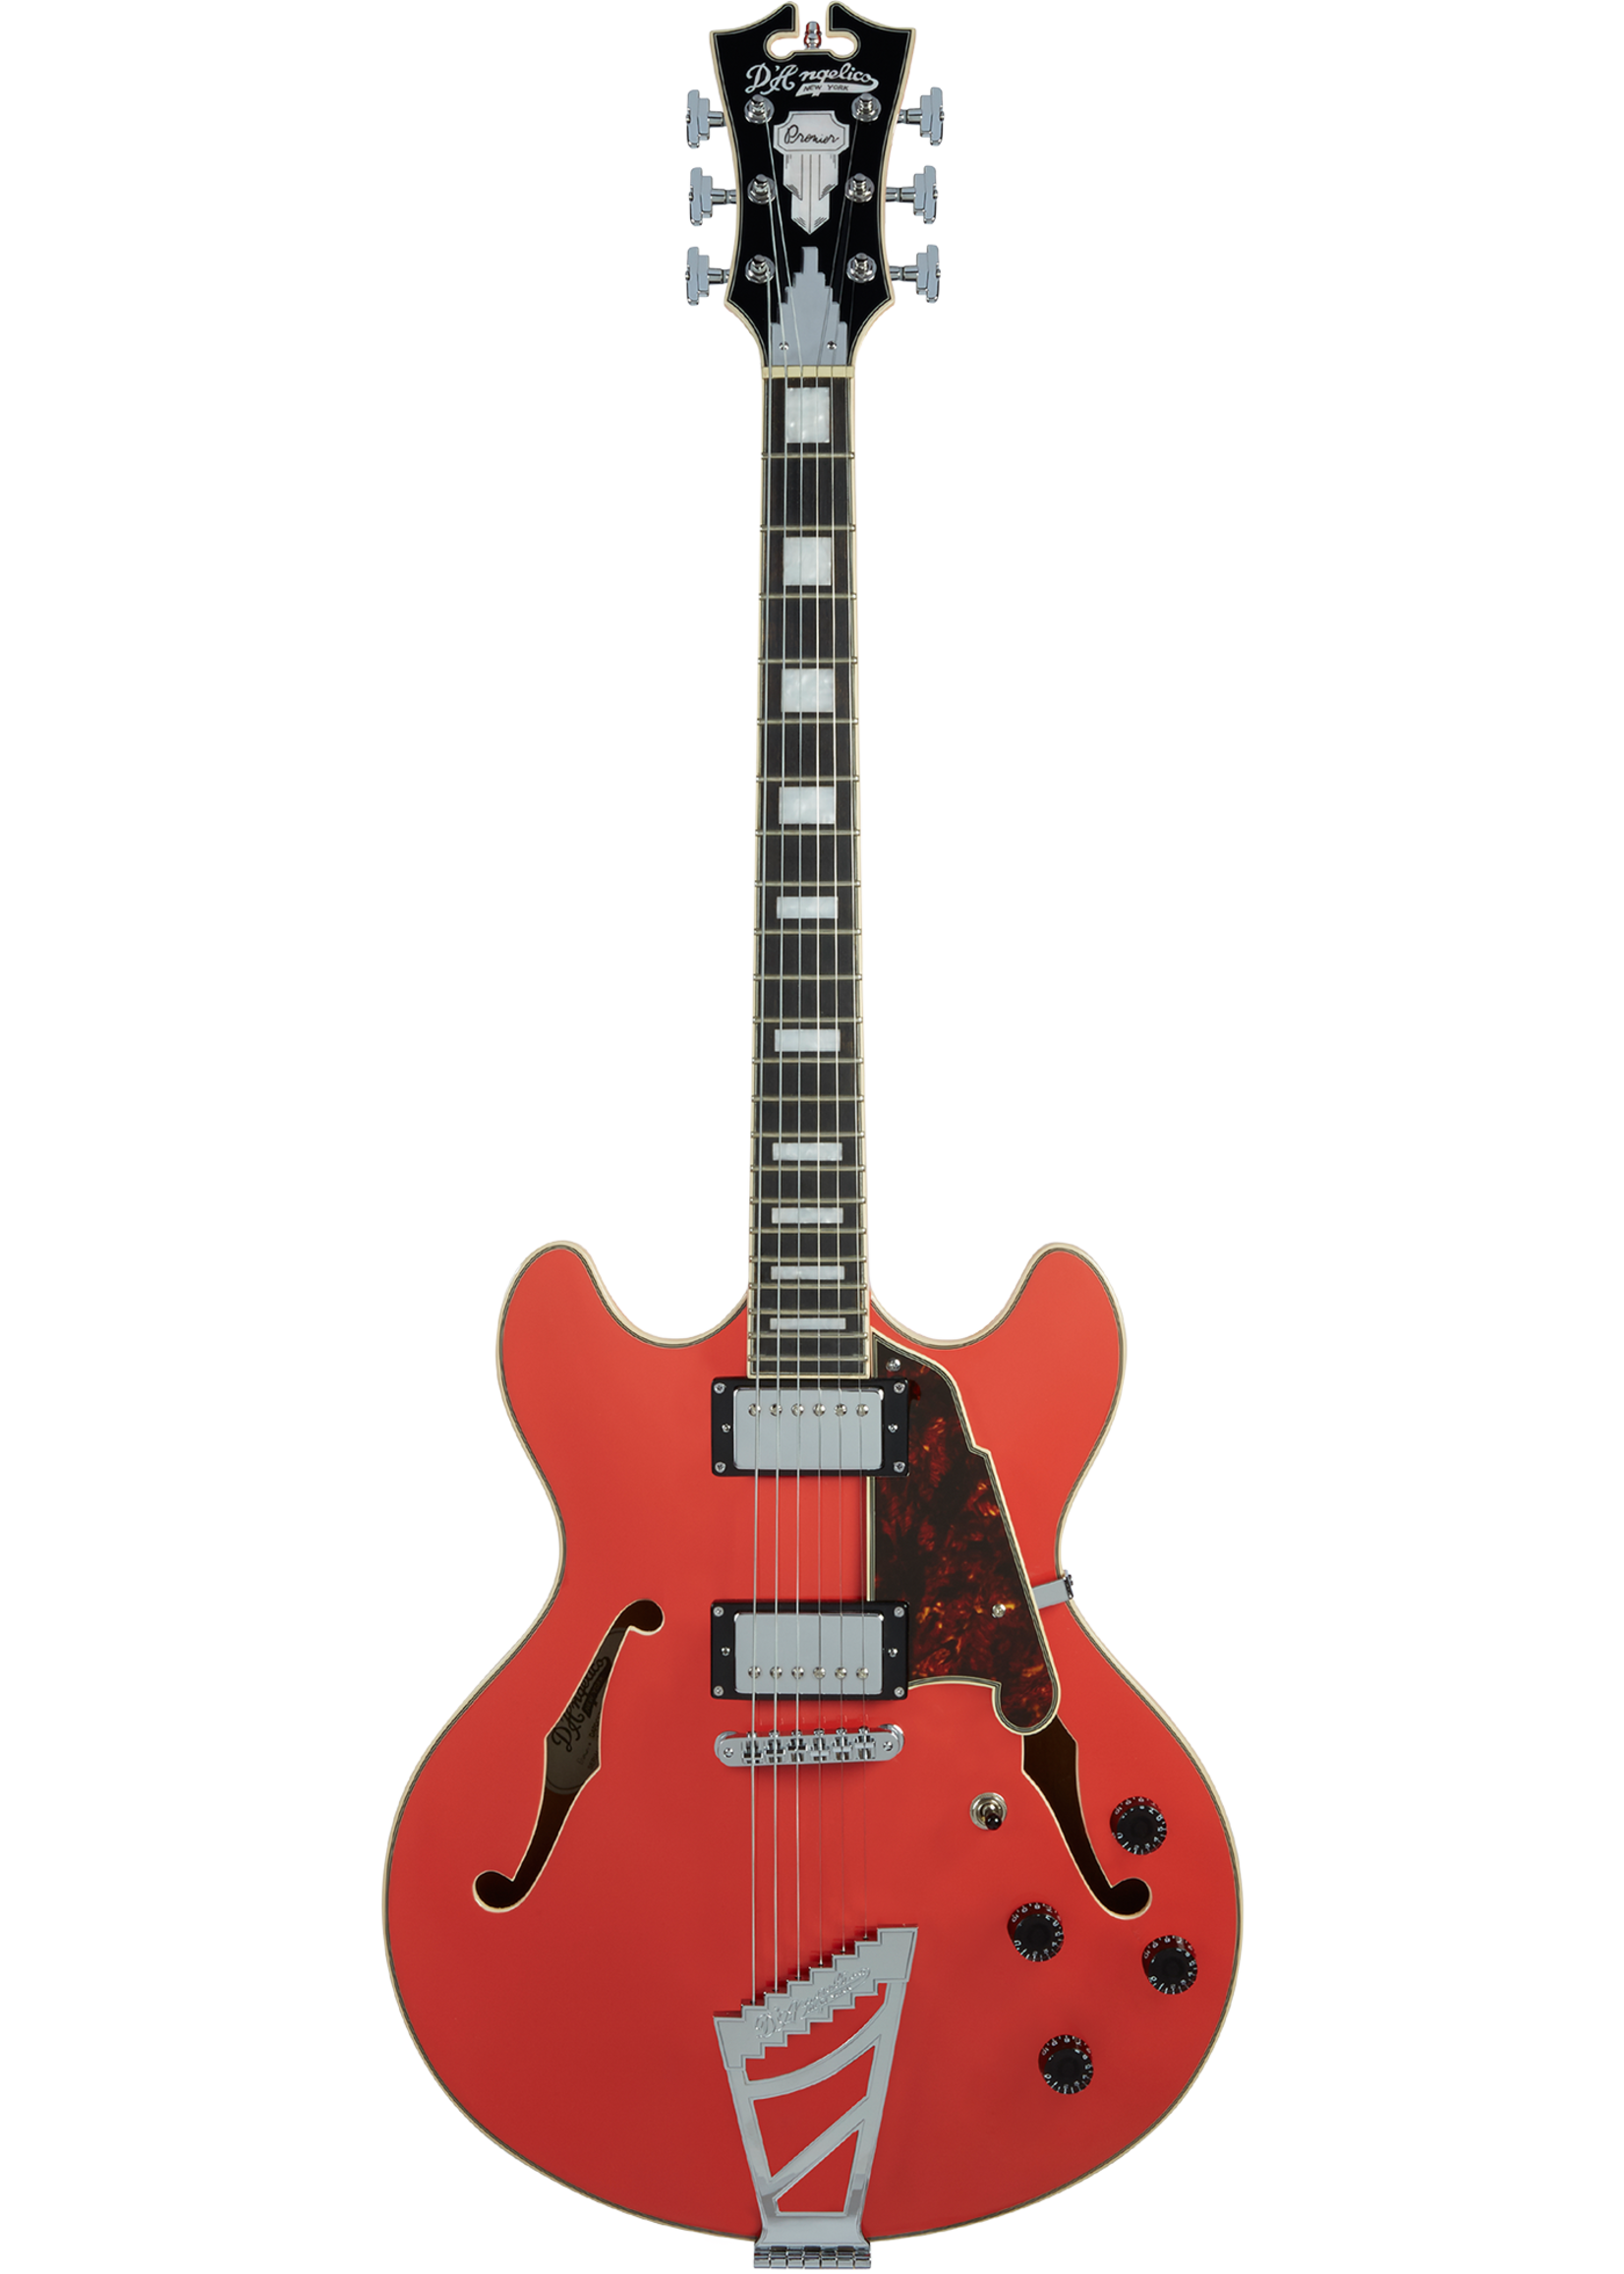 D'Angelico D'Angelico Premier DC with stairstep tailpiece Fiesta Red Incl hoes